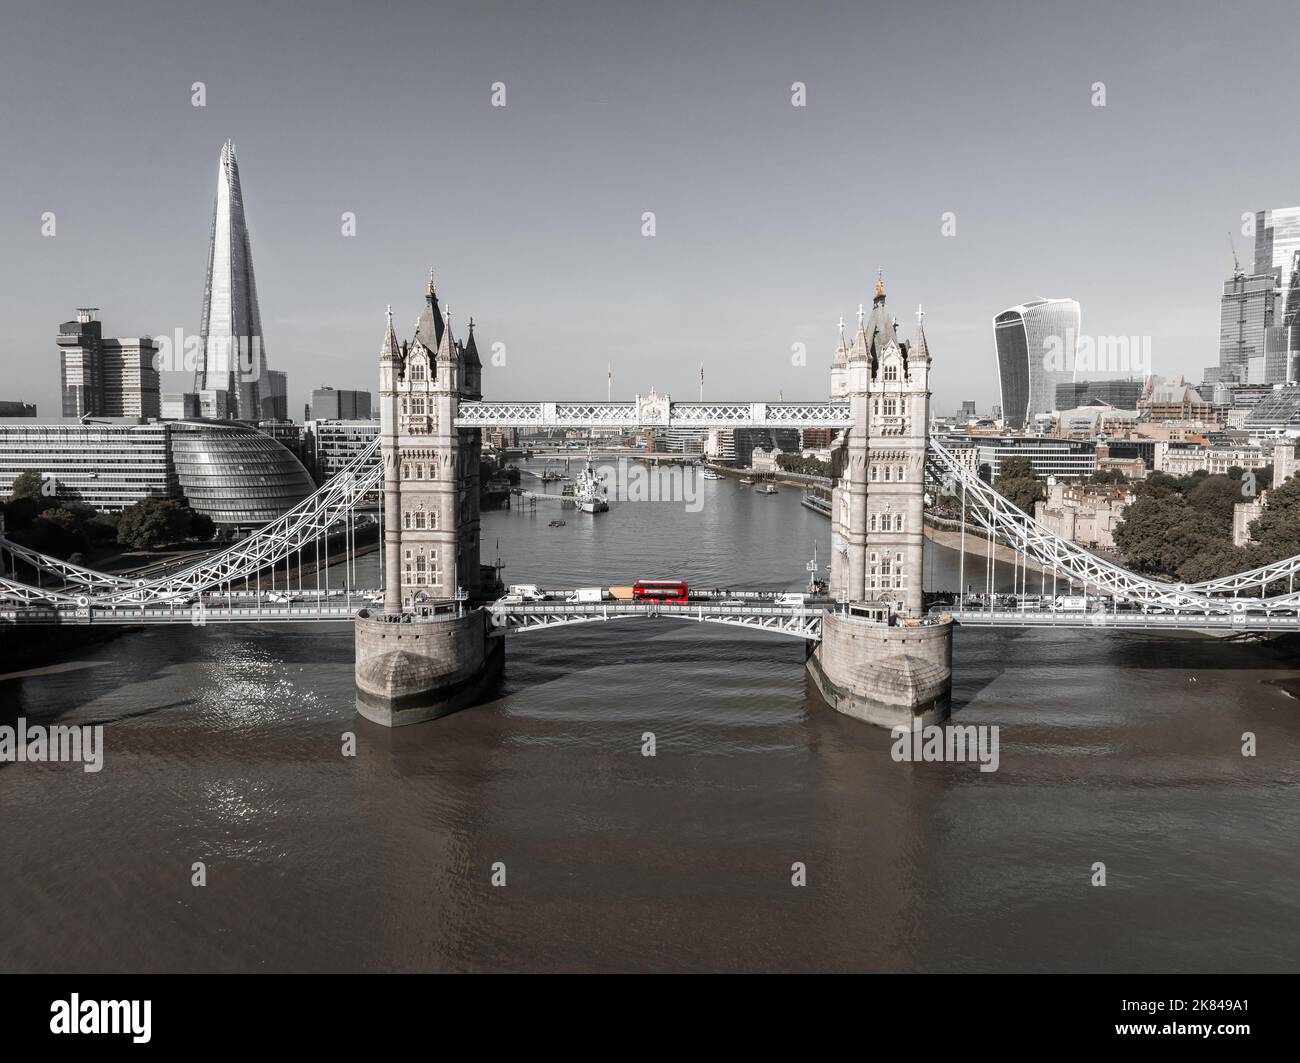 Beautiful black and white photo of London Tower bridge with an iconic red bus driving on it. Stock Photo